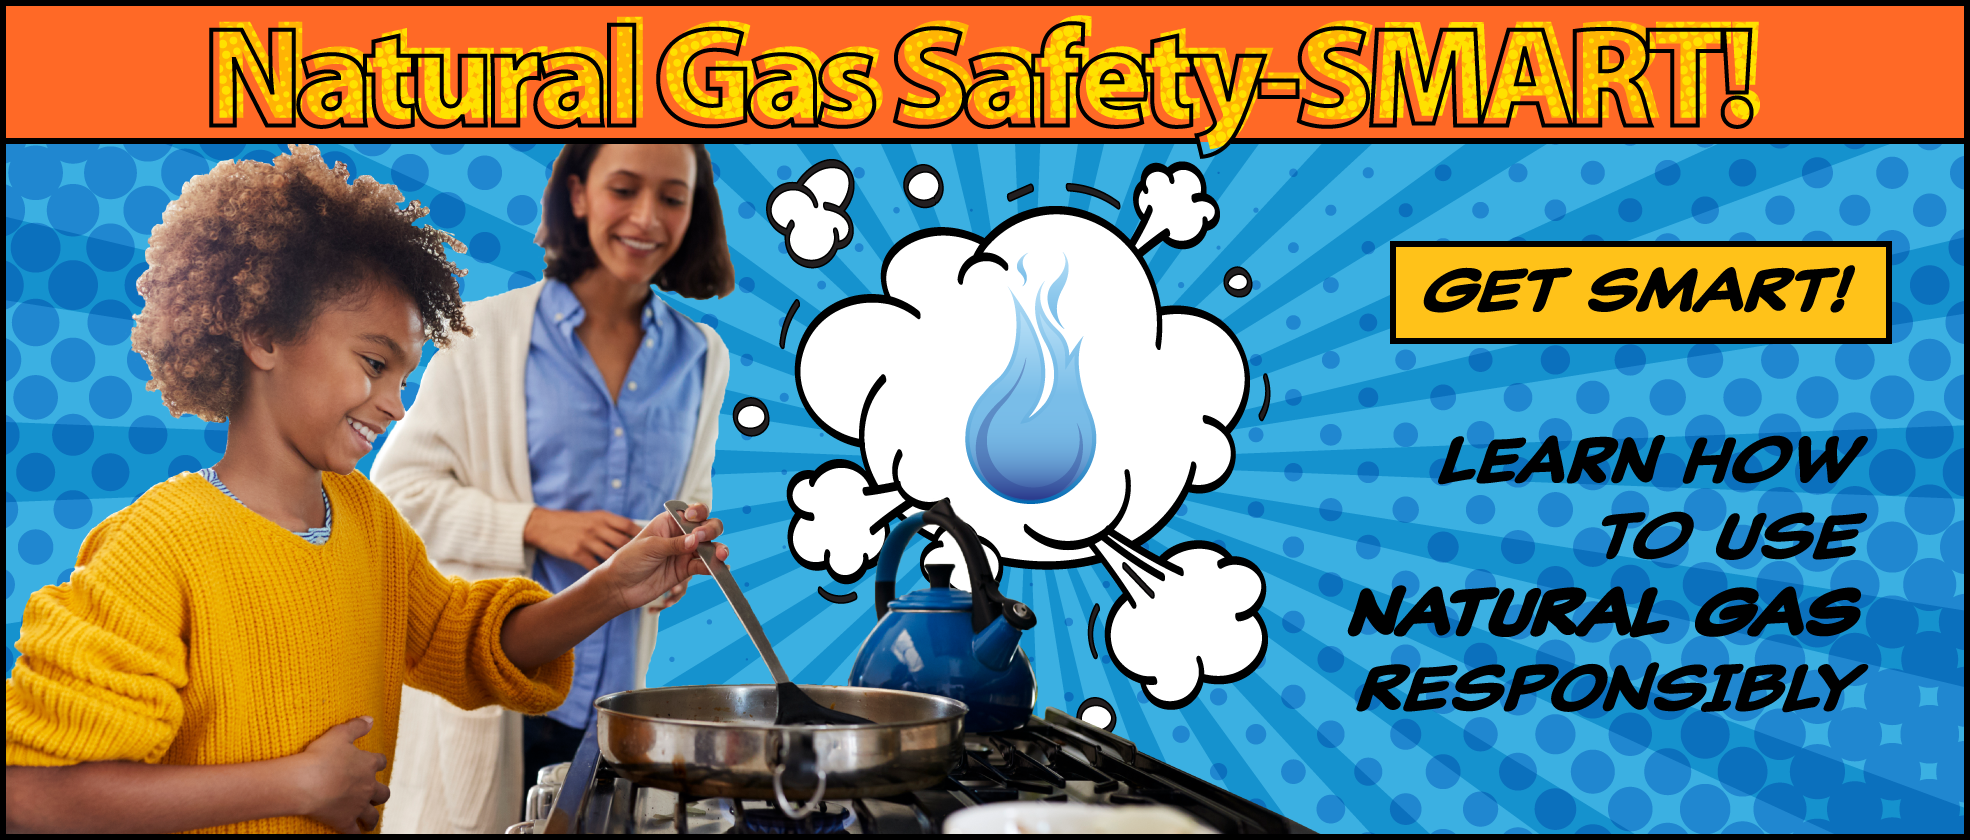 66710 Nat Gas Safety SMART hmpg carousel 1970x840 1